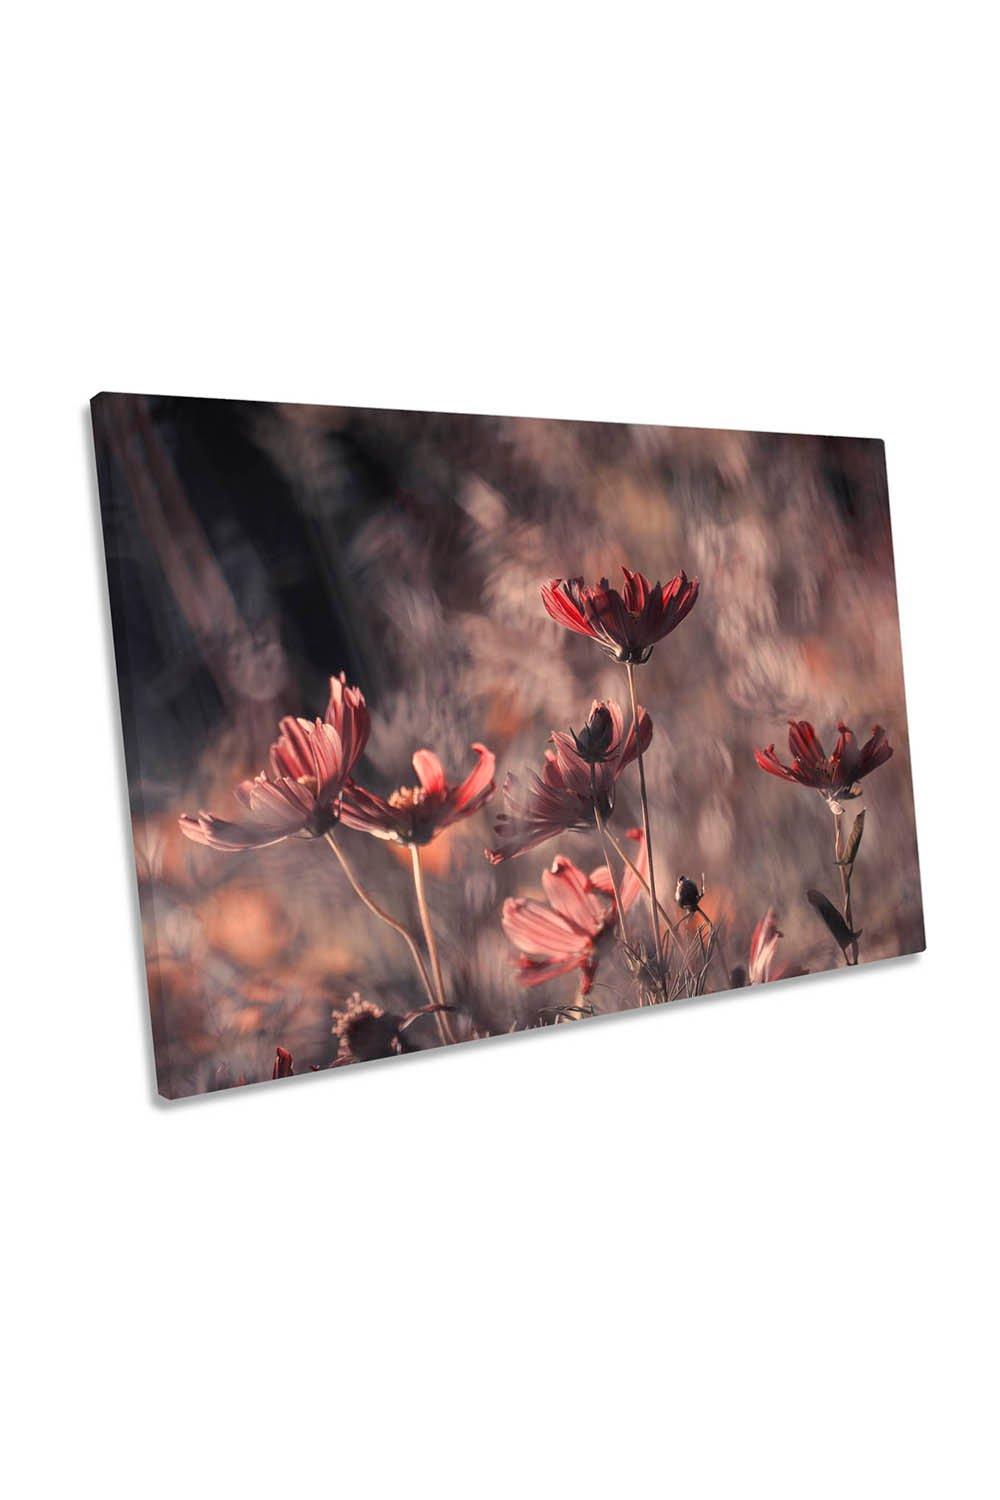 Cosmic Dance Flowers Floral Canvas Wall Art Picture Print